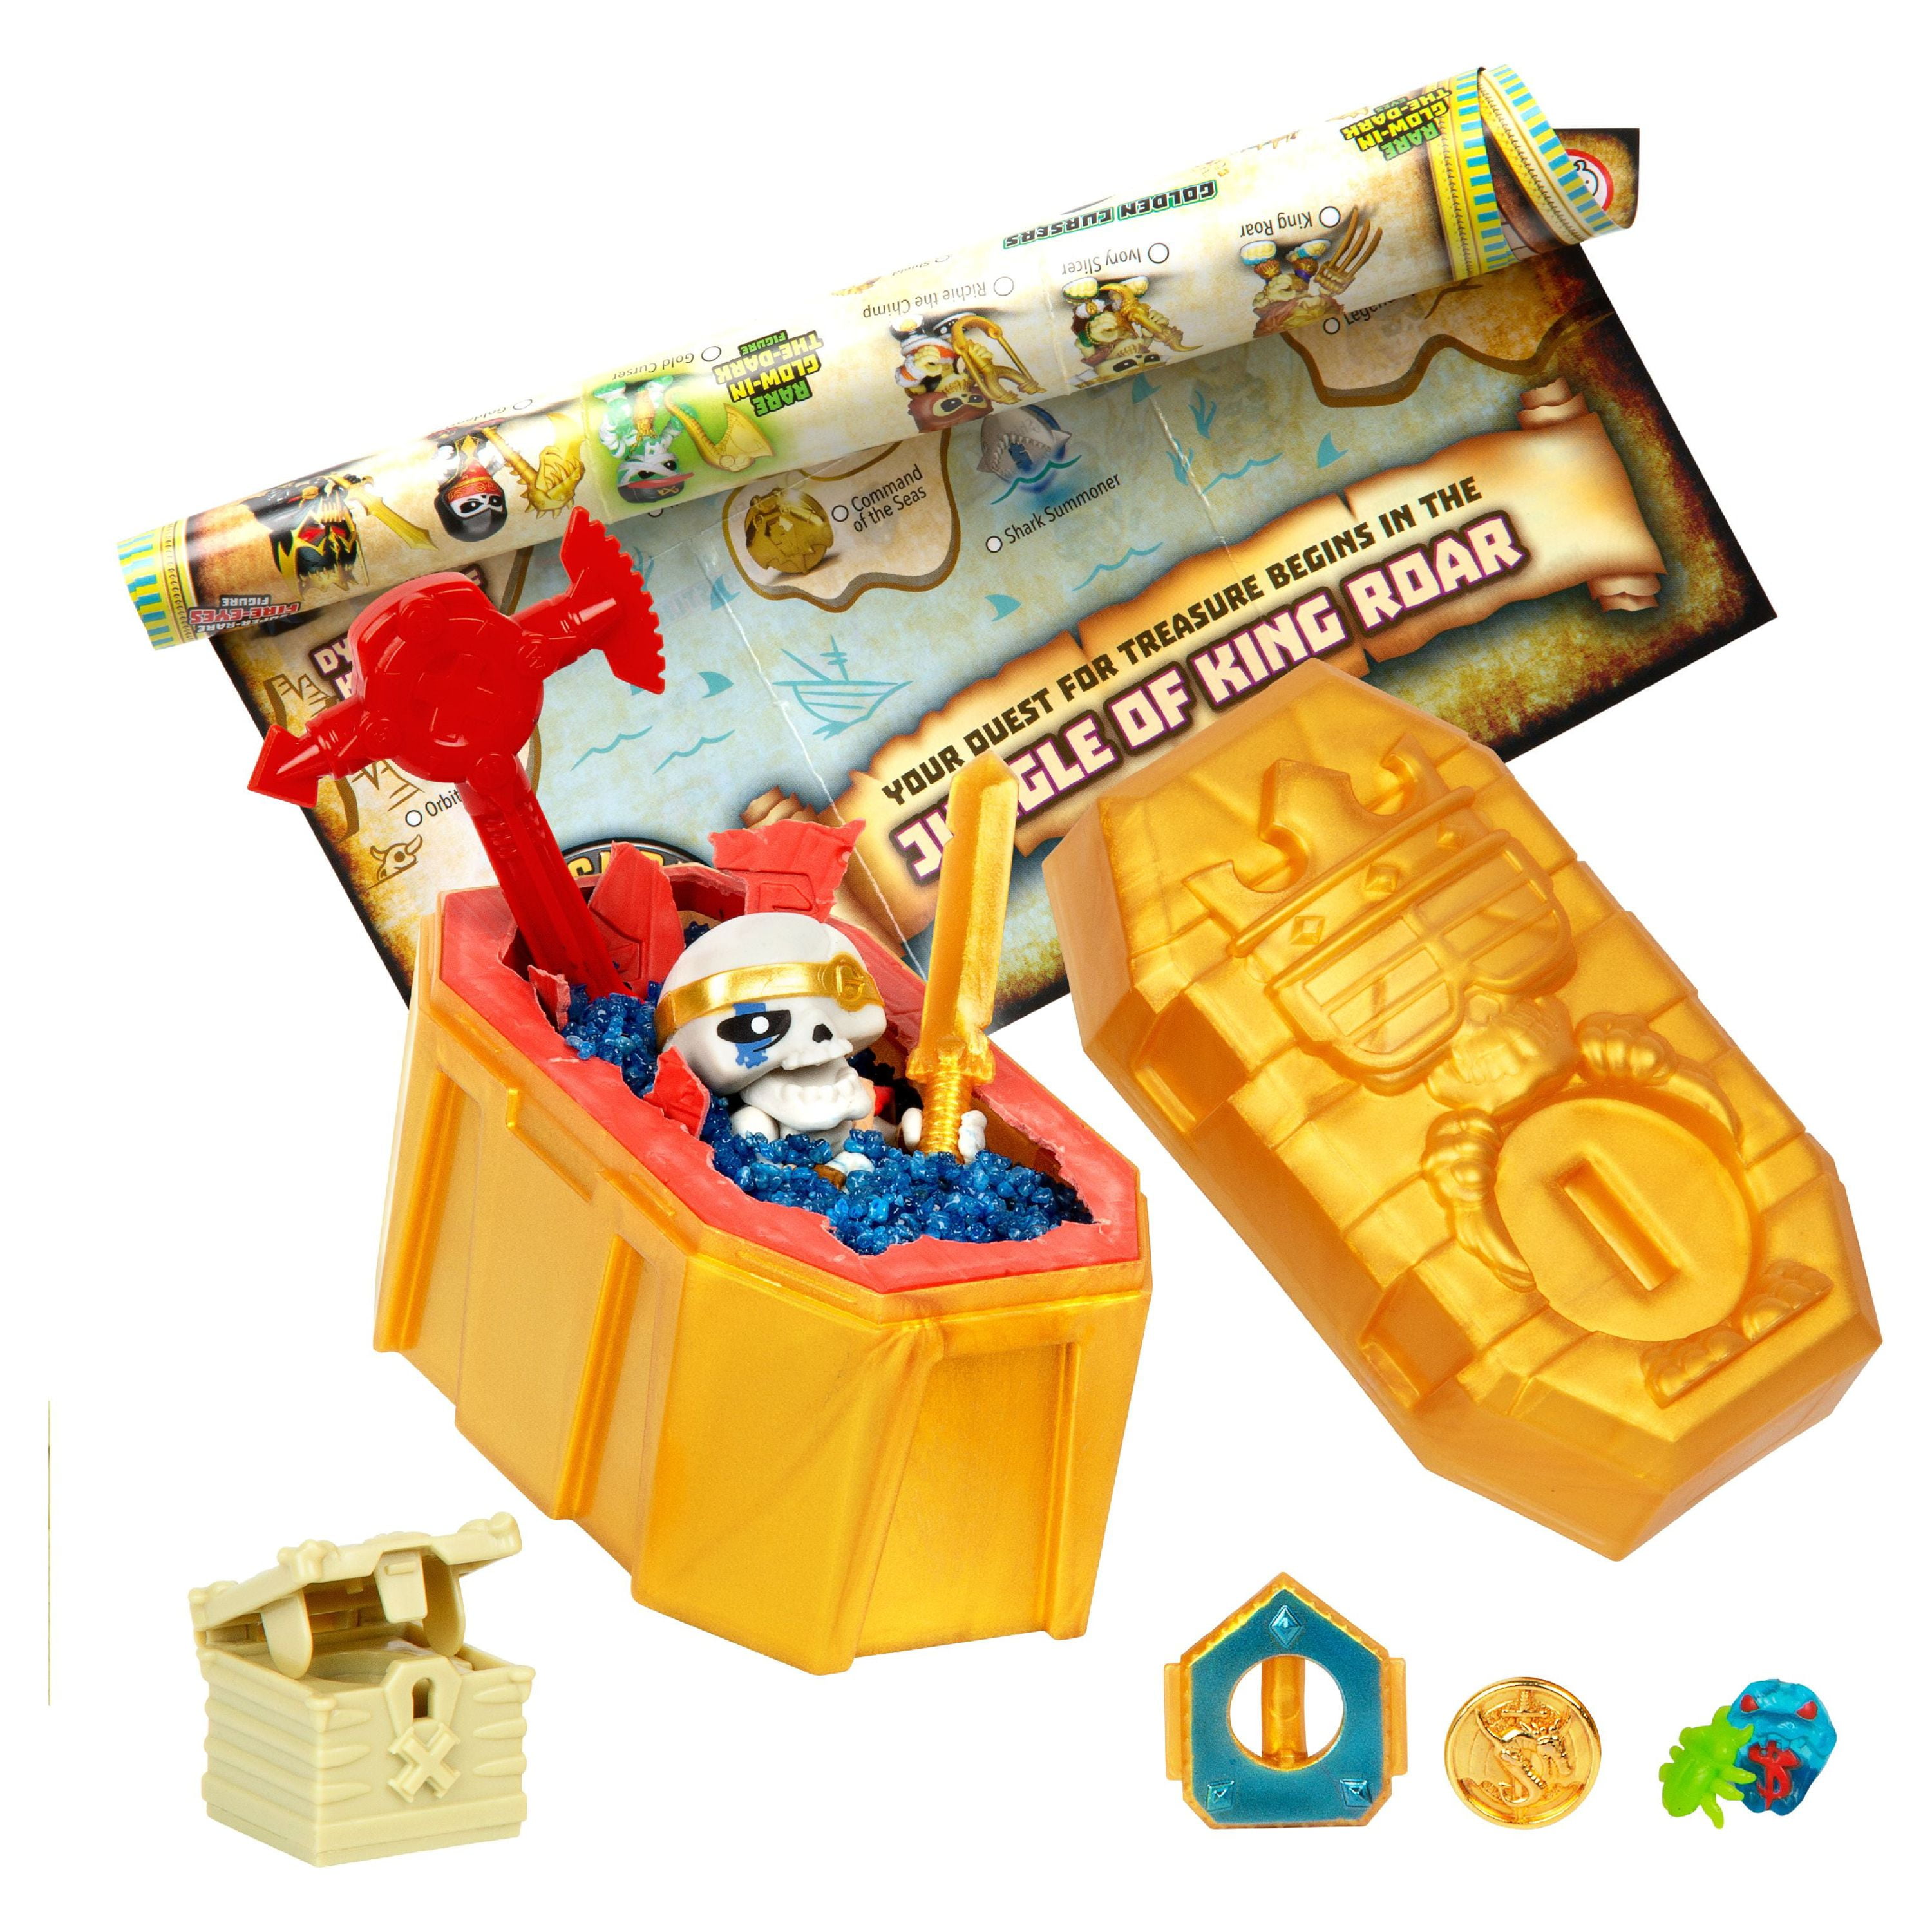 Treasure-X King's Gold, Hunter Pack, Dig and Discover Collectible Figure